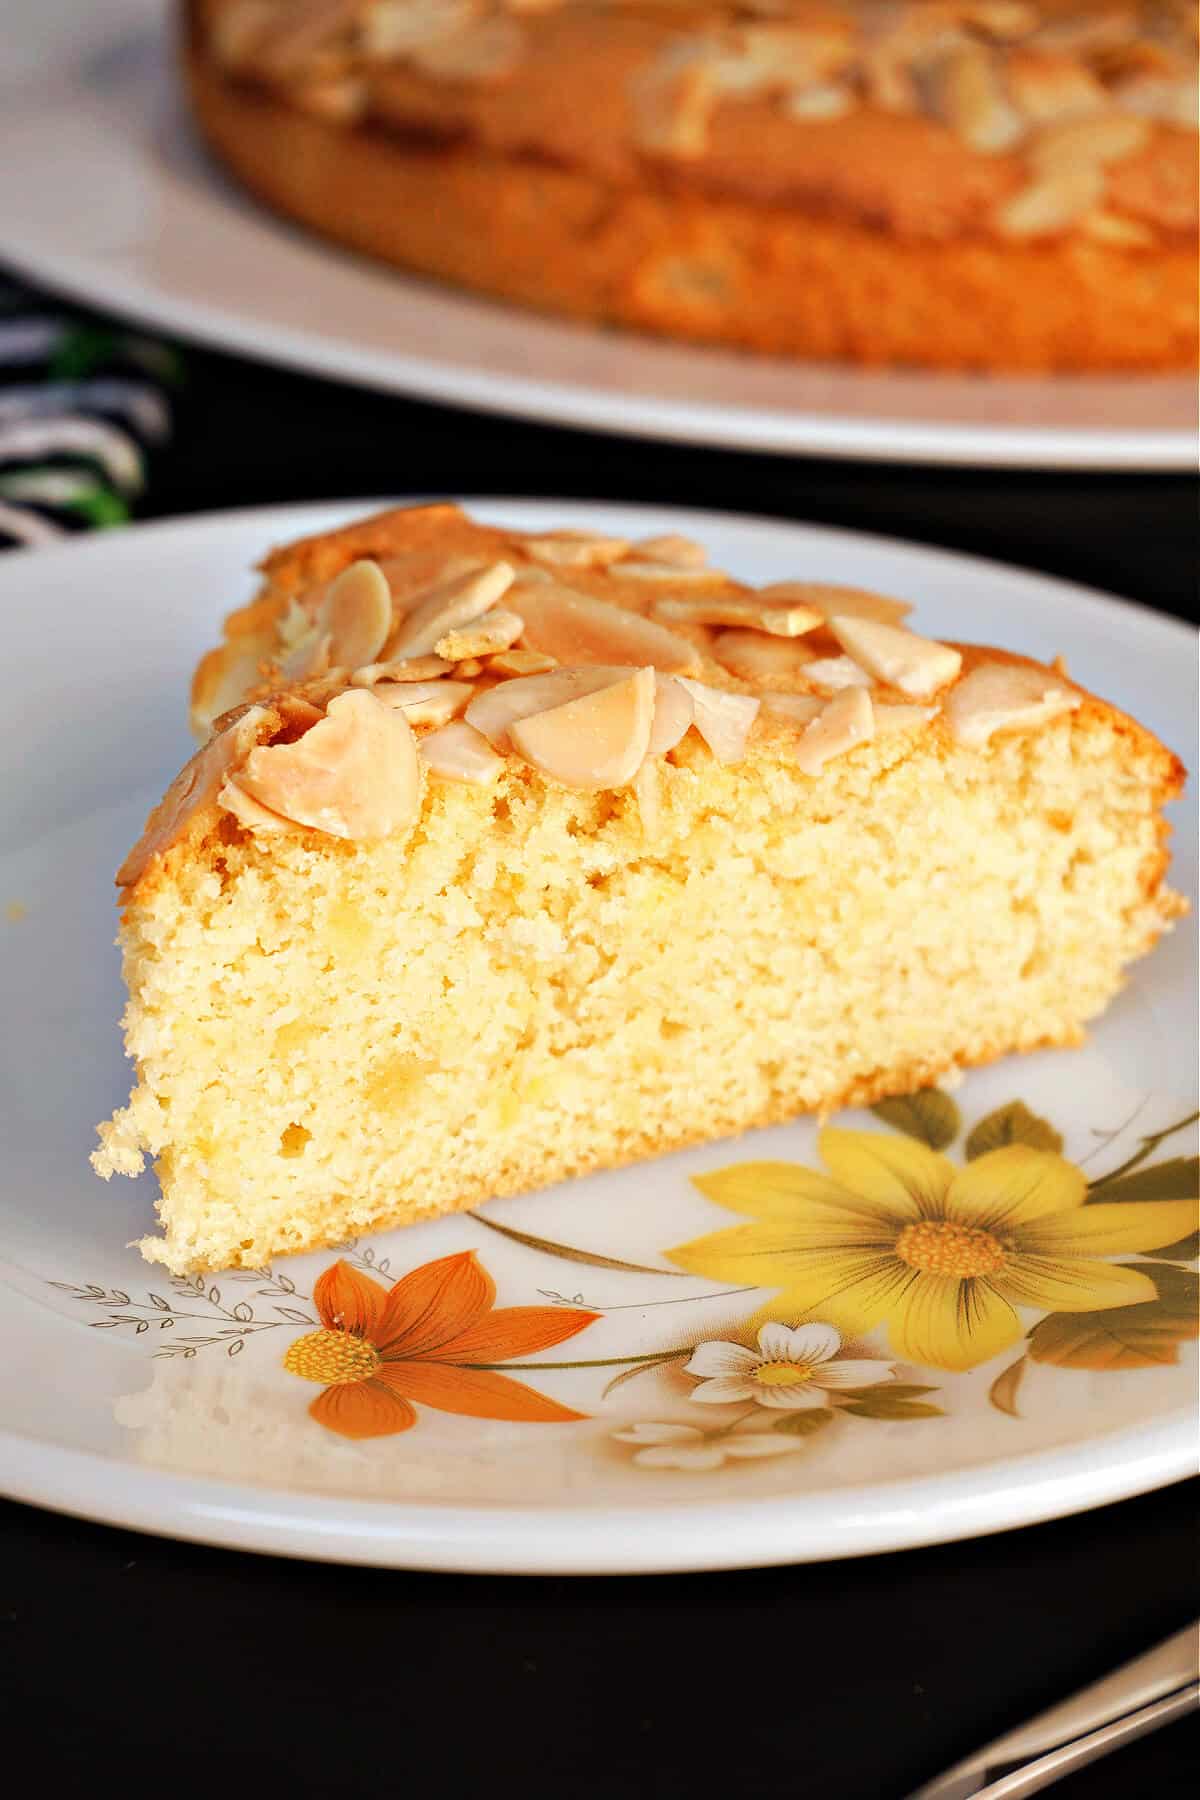 A slice of almond cake on a plate.